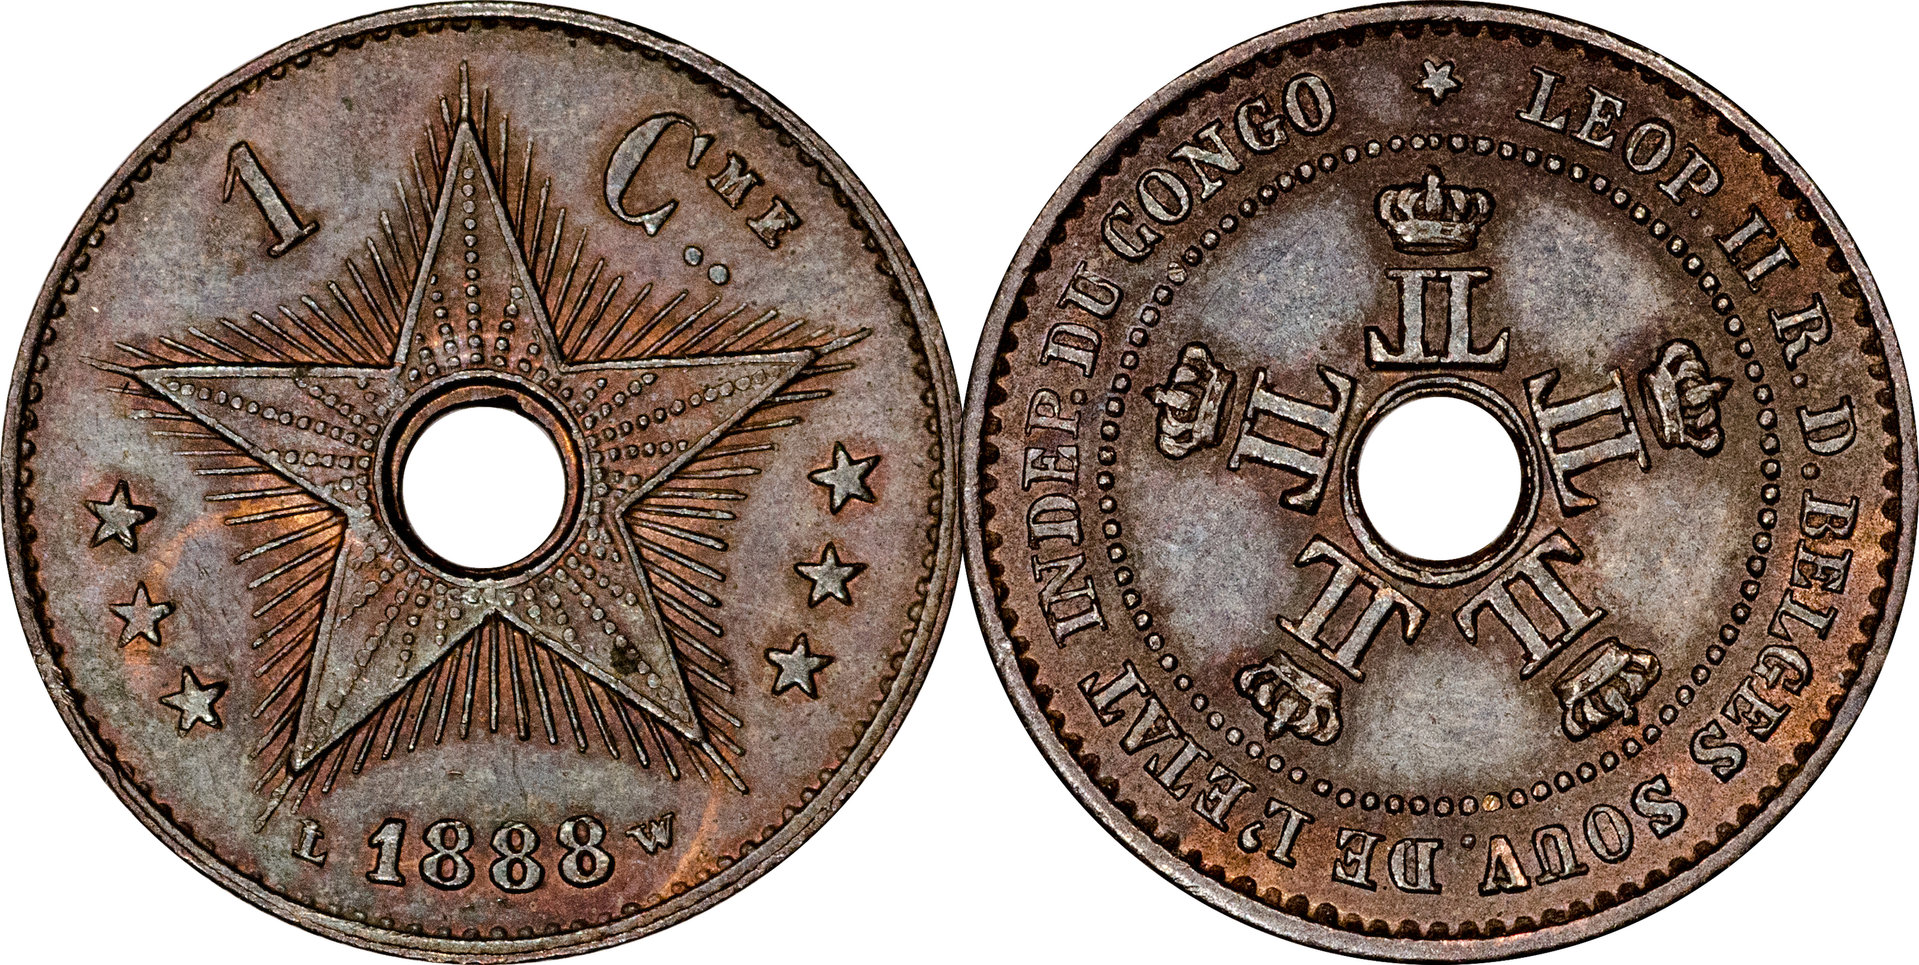 Congo (Free State) - 1888 1 Centime.jpg